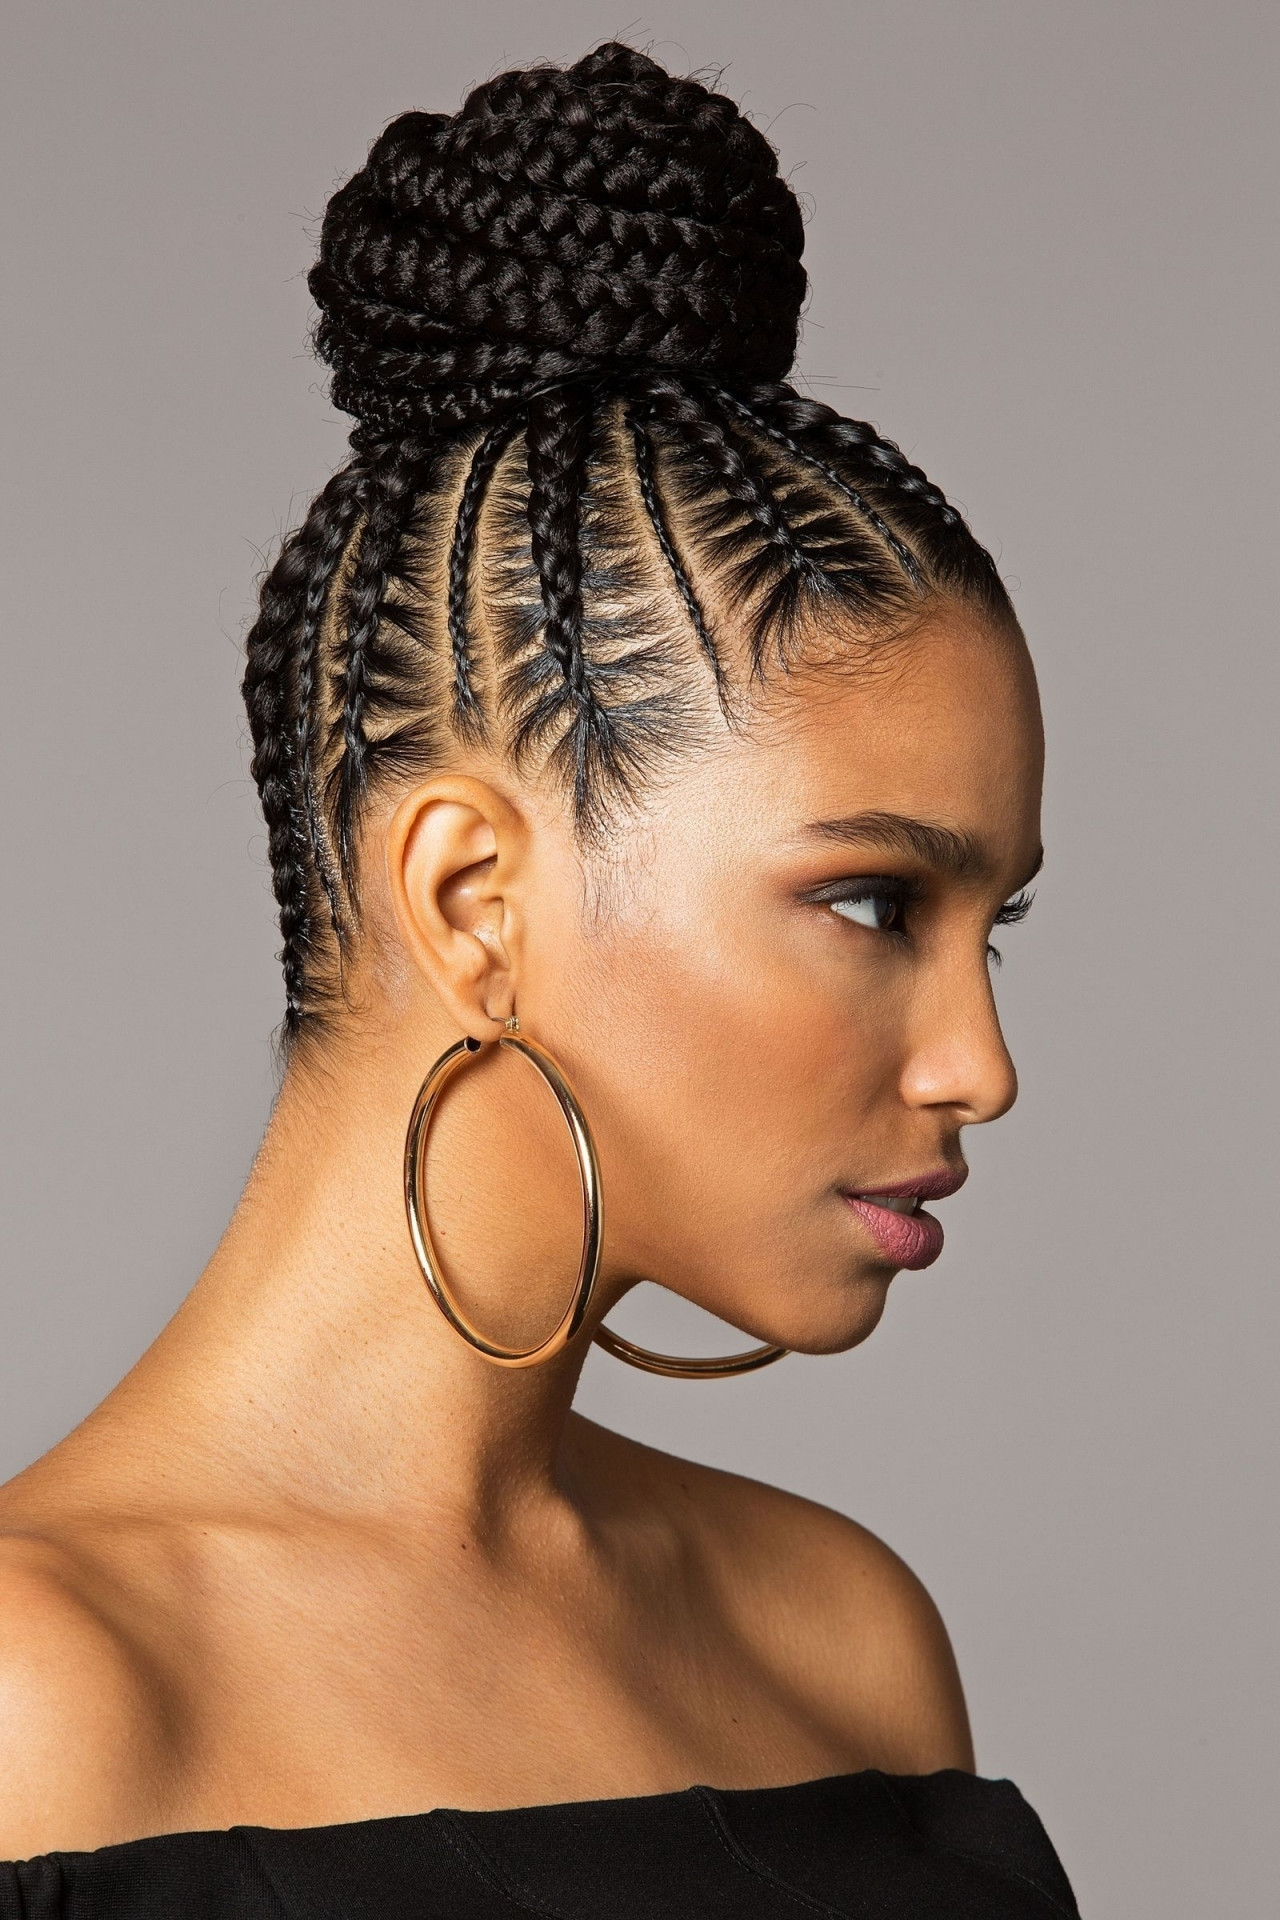 Black Updo Hairstyles With Weave
 2019 Latest Braided Updo Hairstyles With Weave